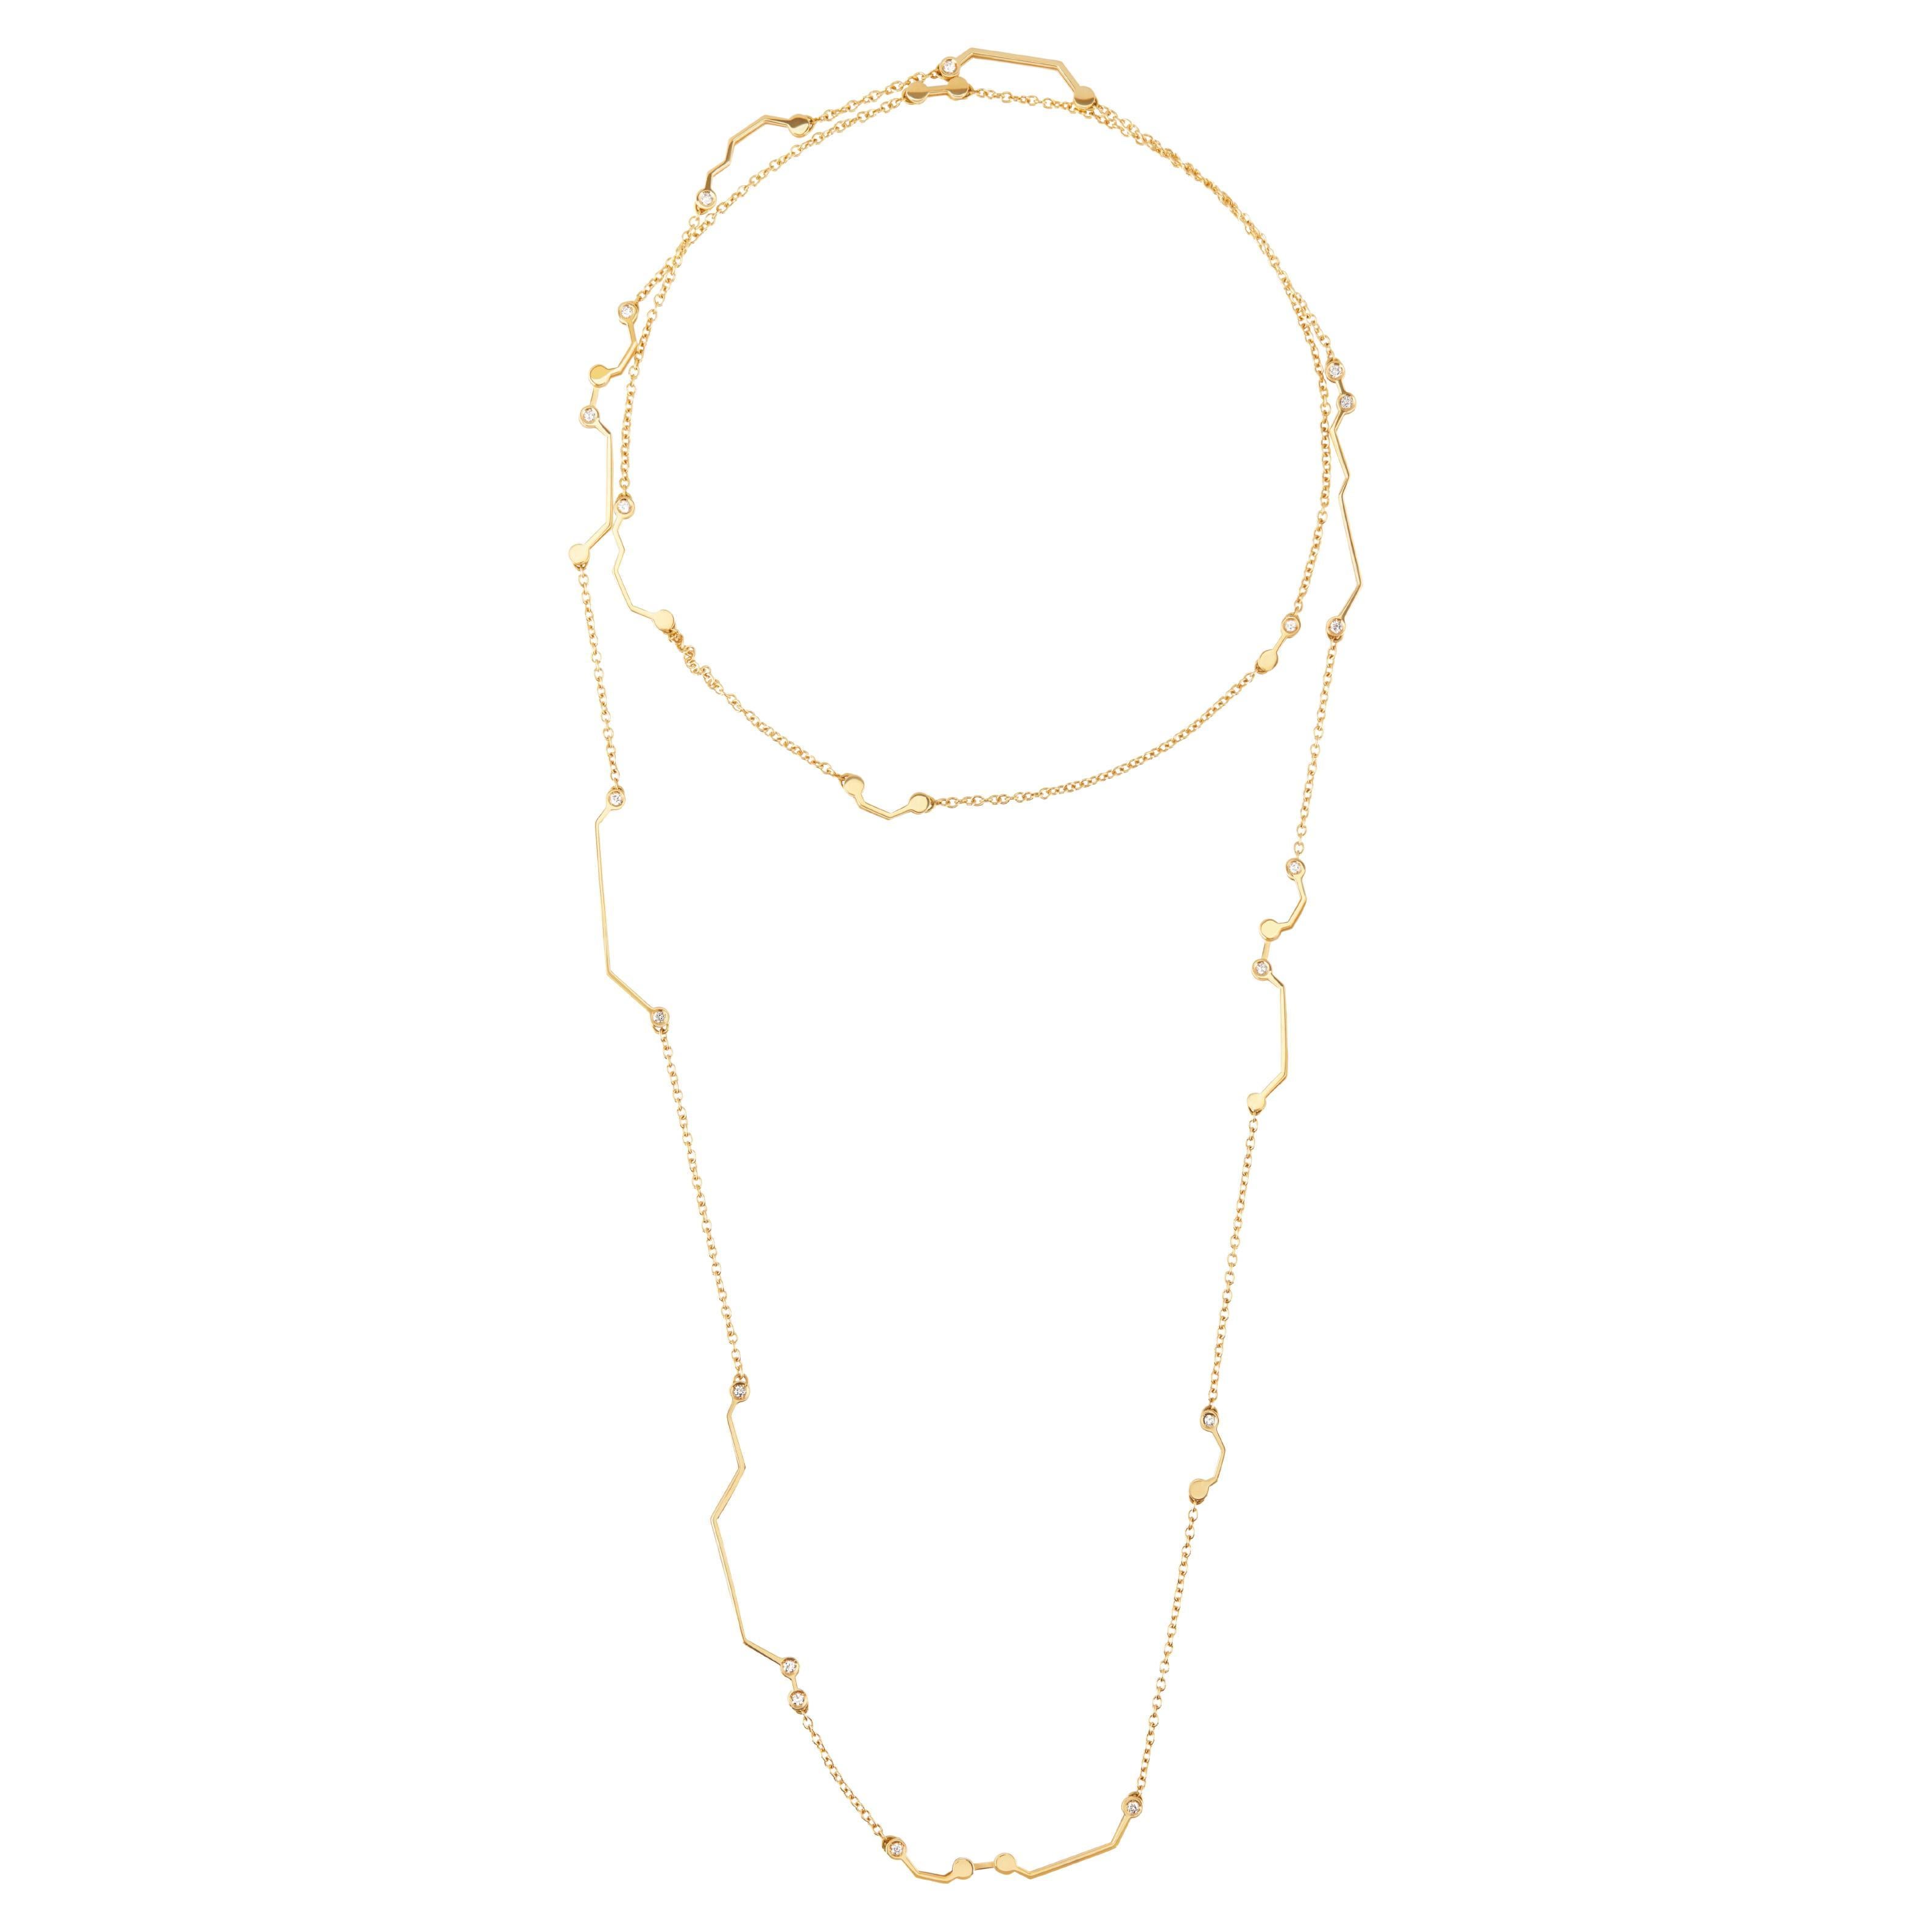 Nathalie Jean Contemporary 0.468 Carat Diamond Yellow Gold Link Chain Necklace For Sale